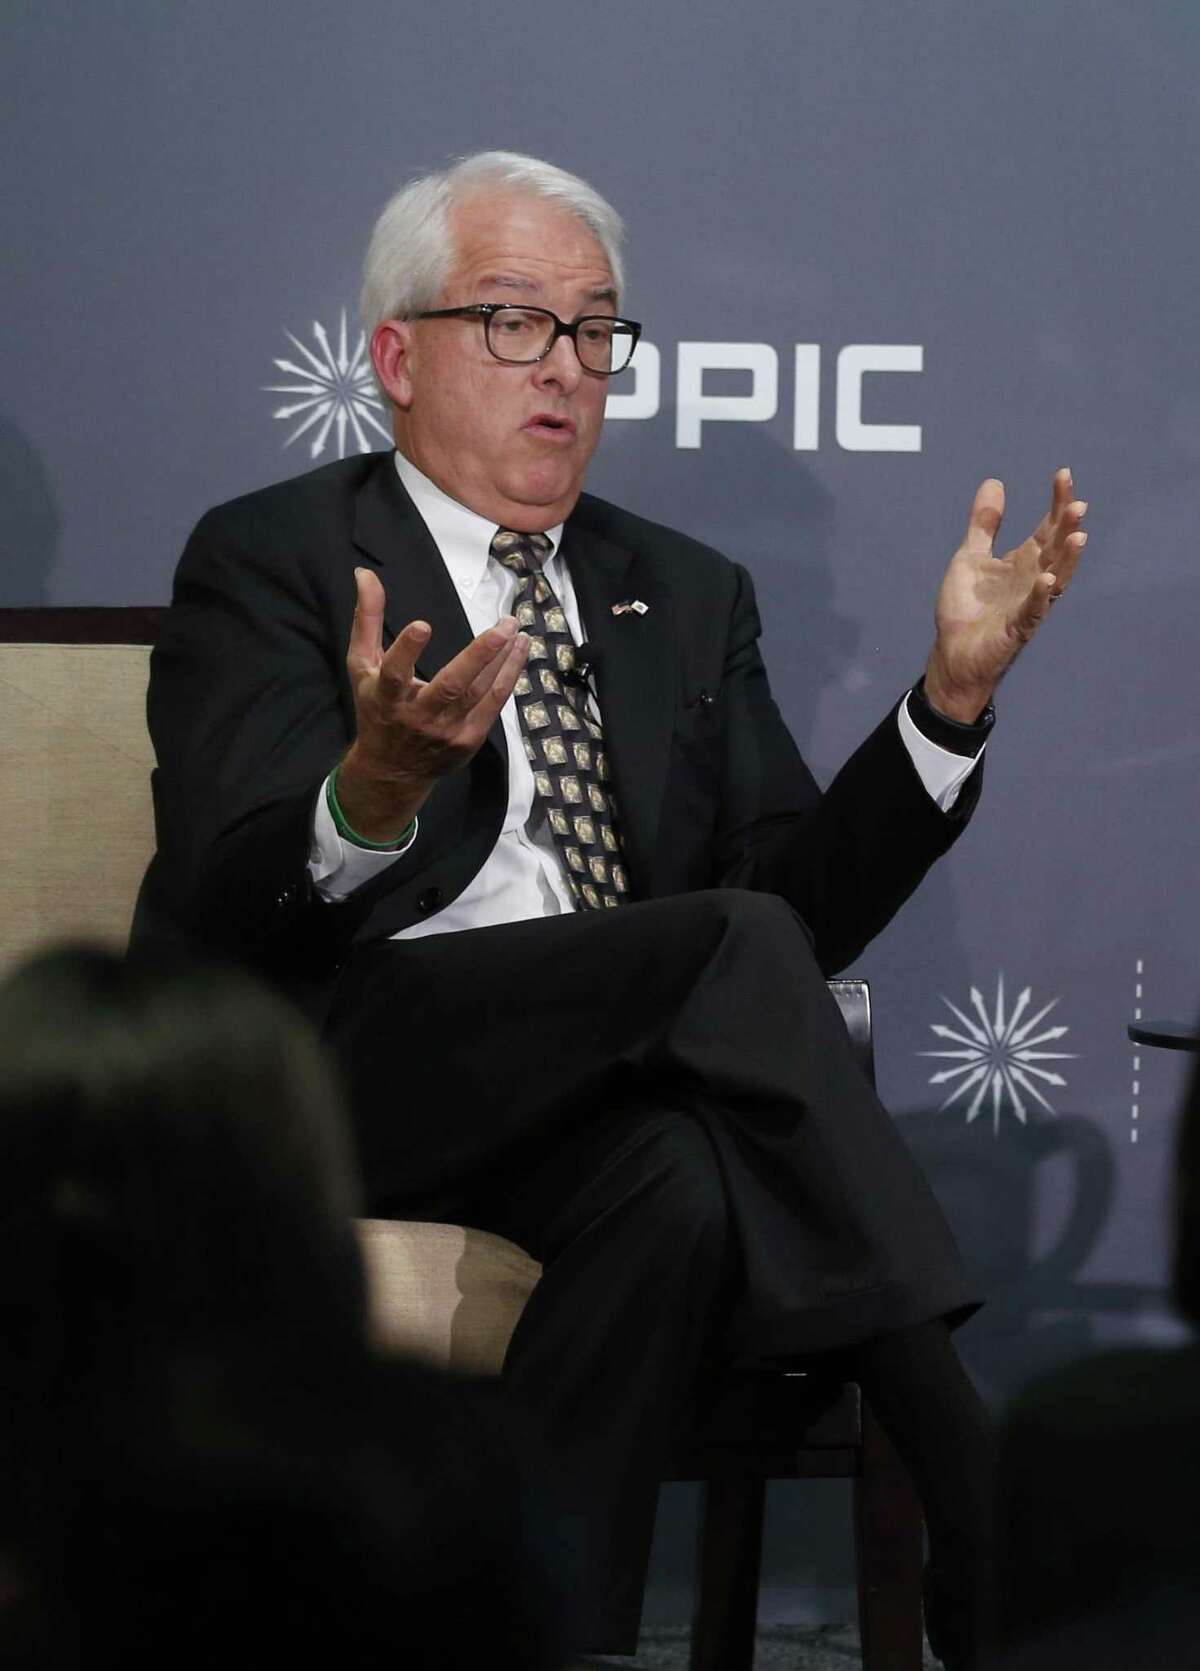 John Cox (left), a Republican candidate in the California gubernatorial race, meets in conversation with Public Policy Institute of California CEO Mark Baldassare in San Francisco, Calif. on Thursday, Dec. 7, 2017.